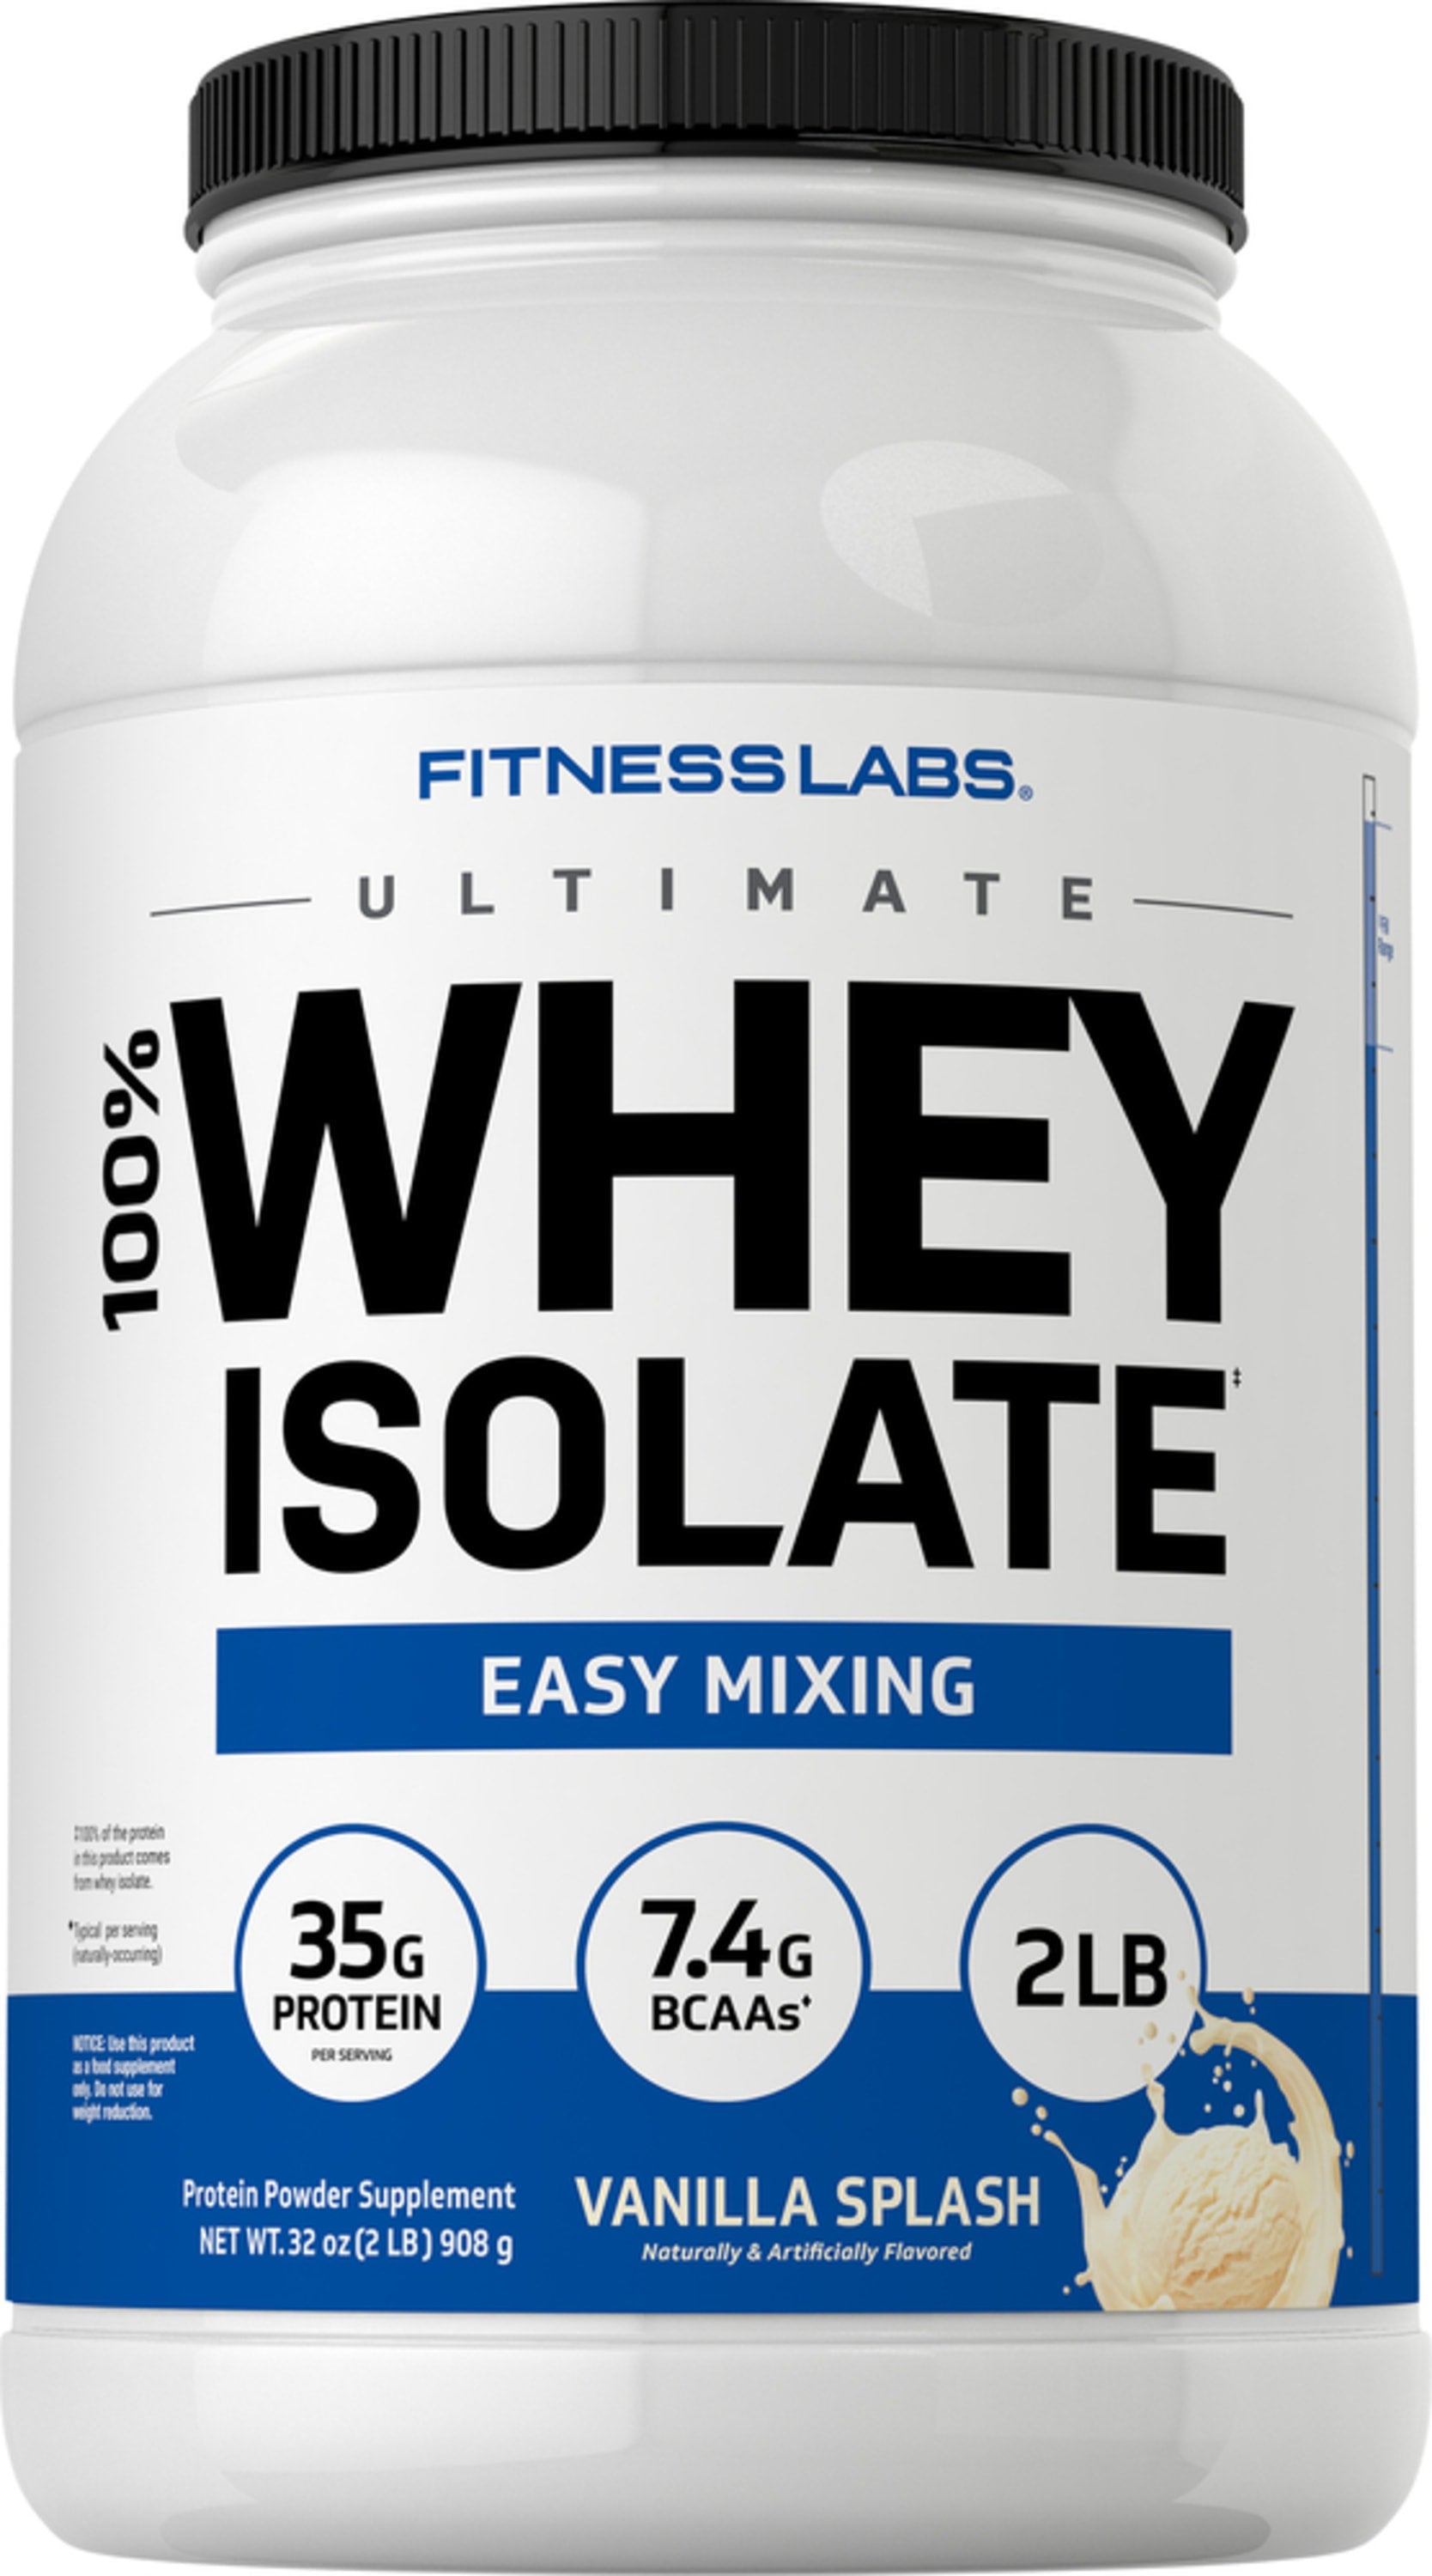 Whey Protein Isolate (Unflavored & Unsweetened), 2 lb (908 g) Bottle |  PipingRock Health Products